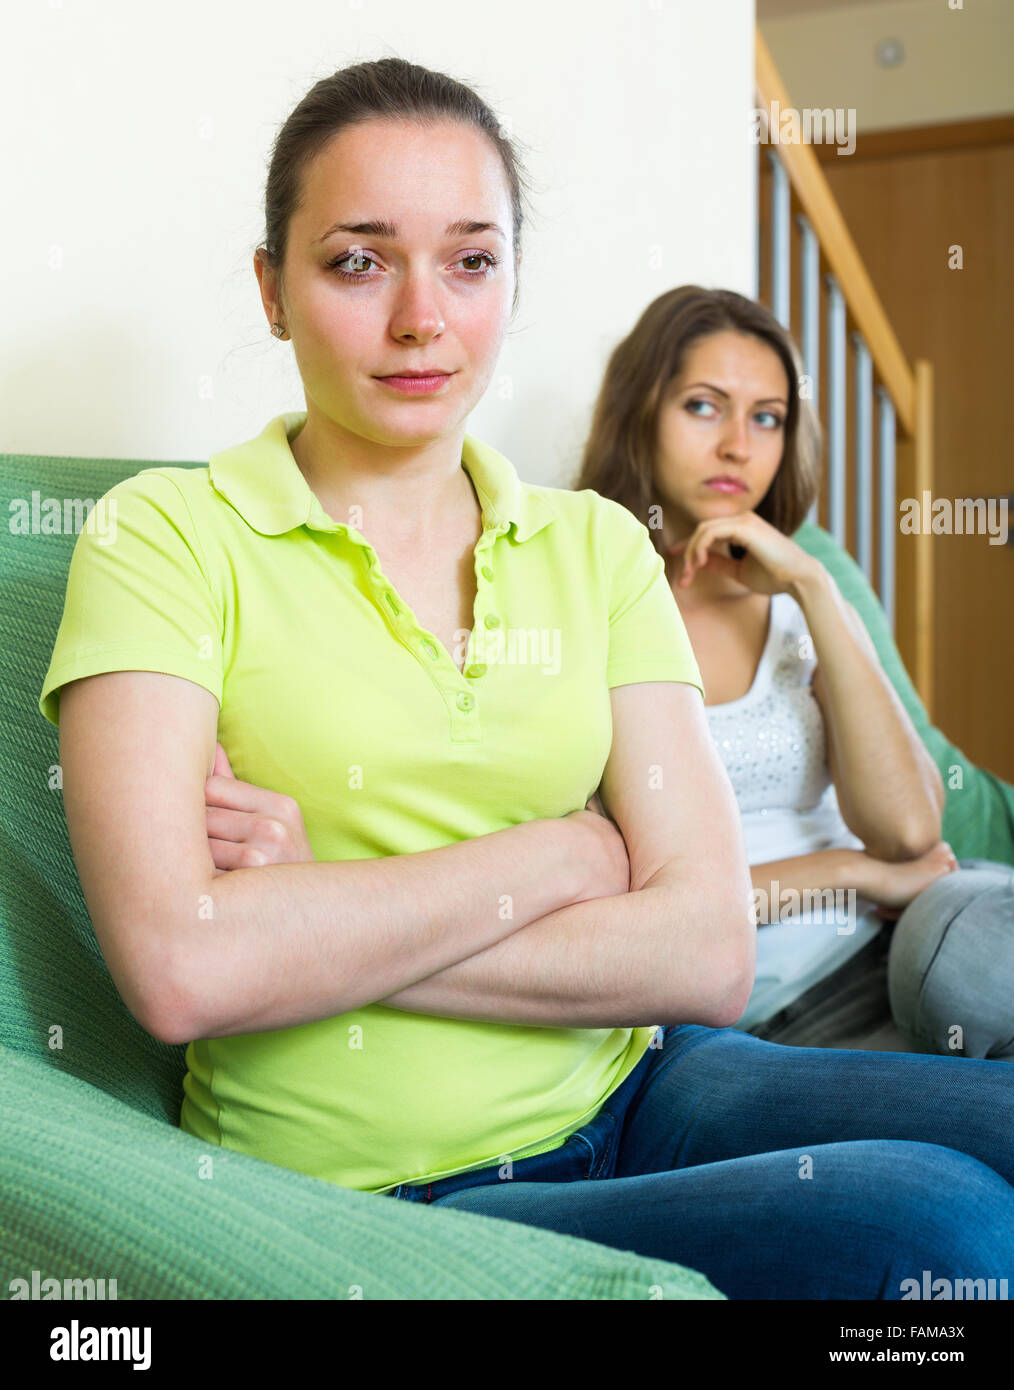 Two young unpleased women after quarrel at home Stock Photo